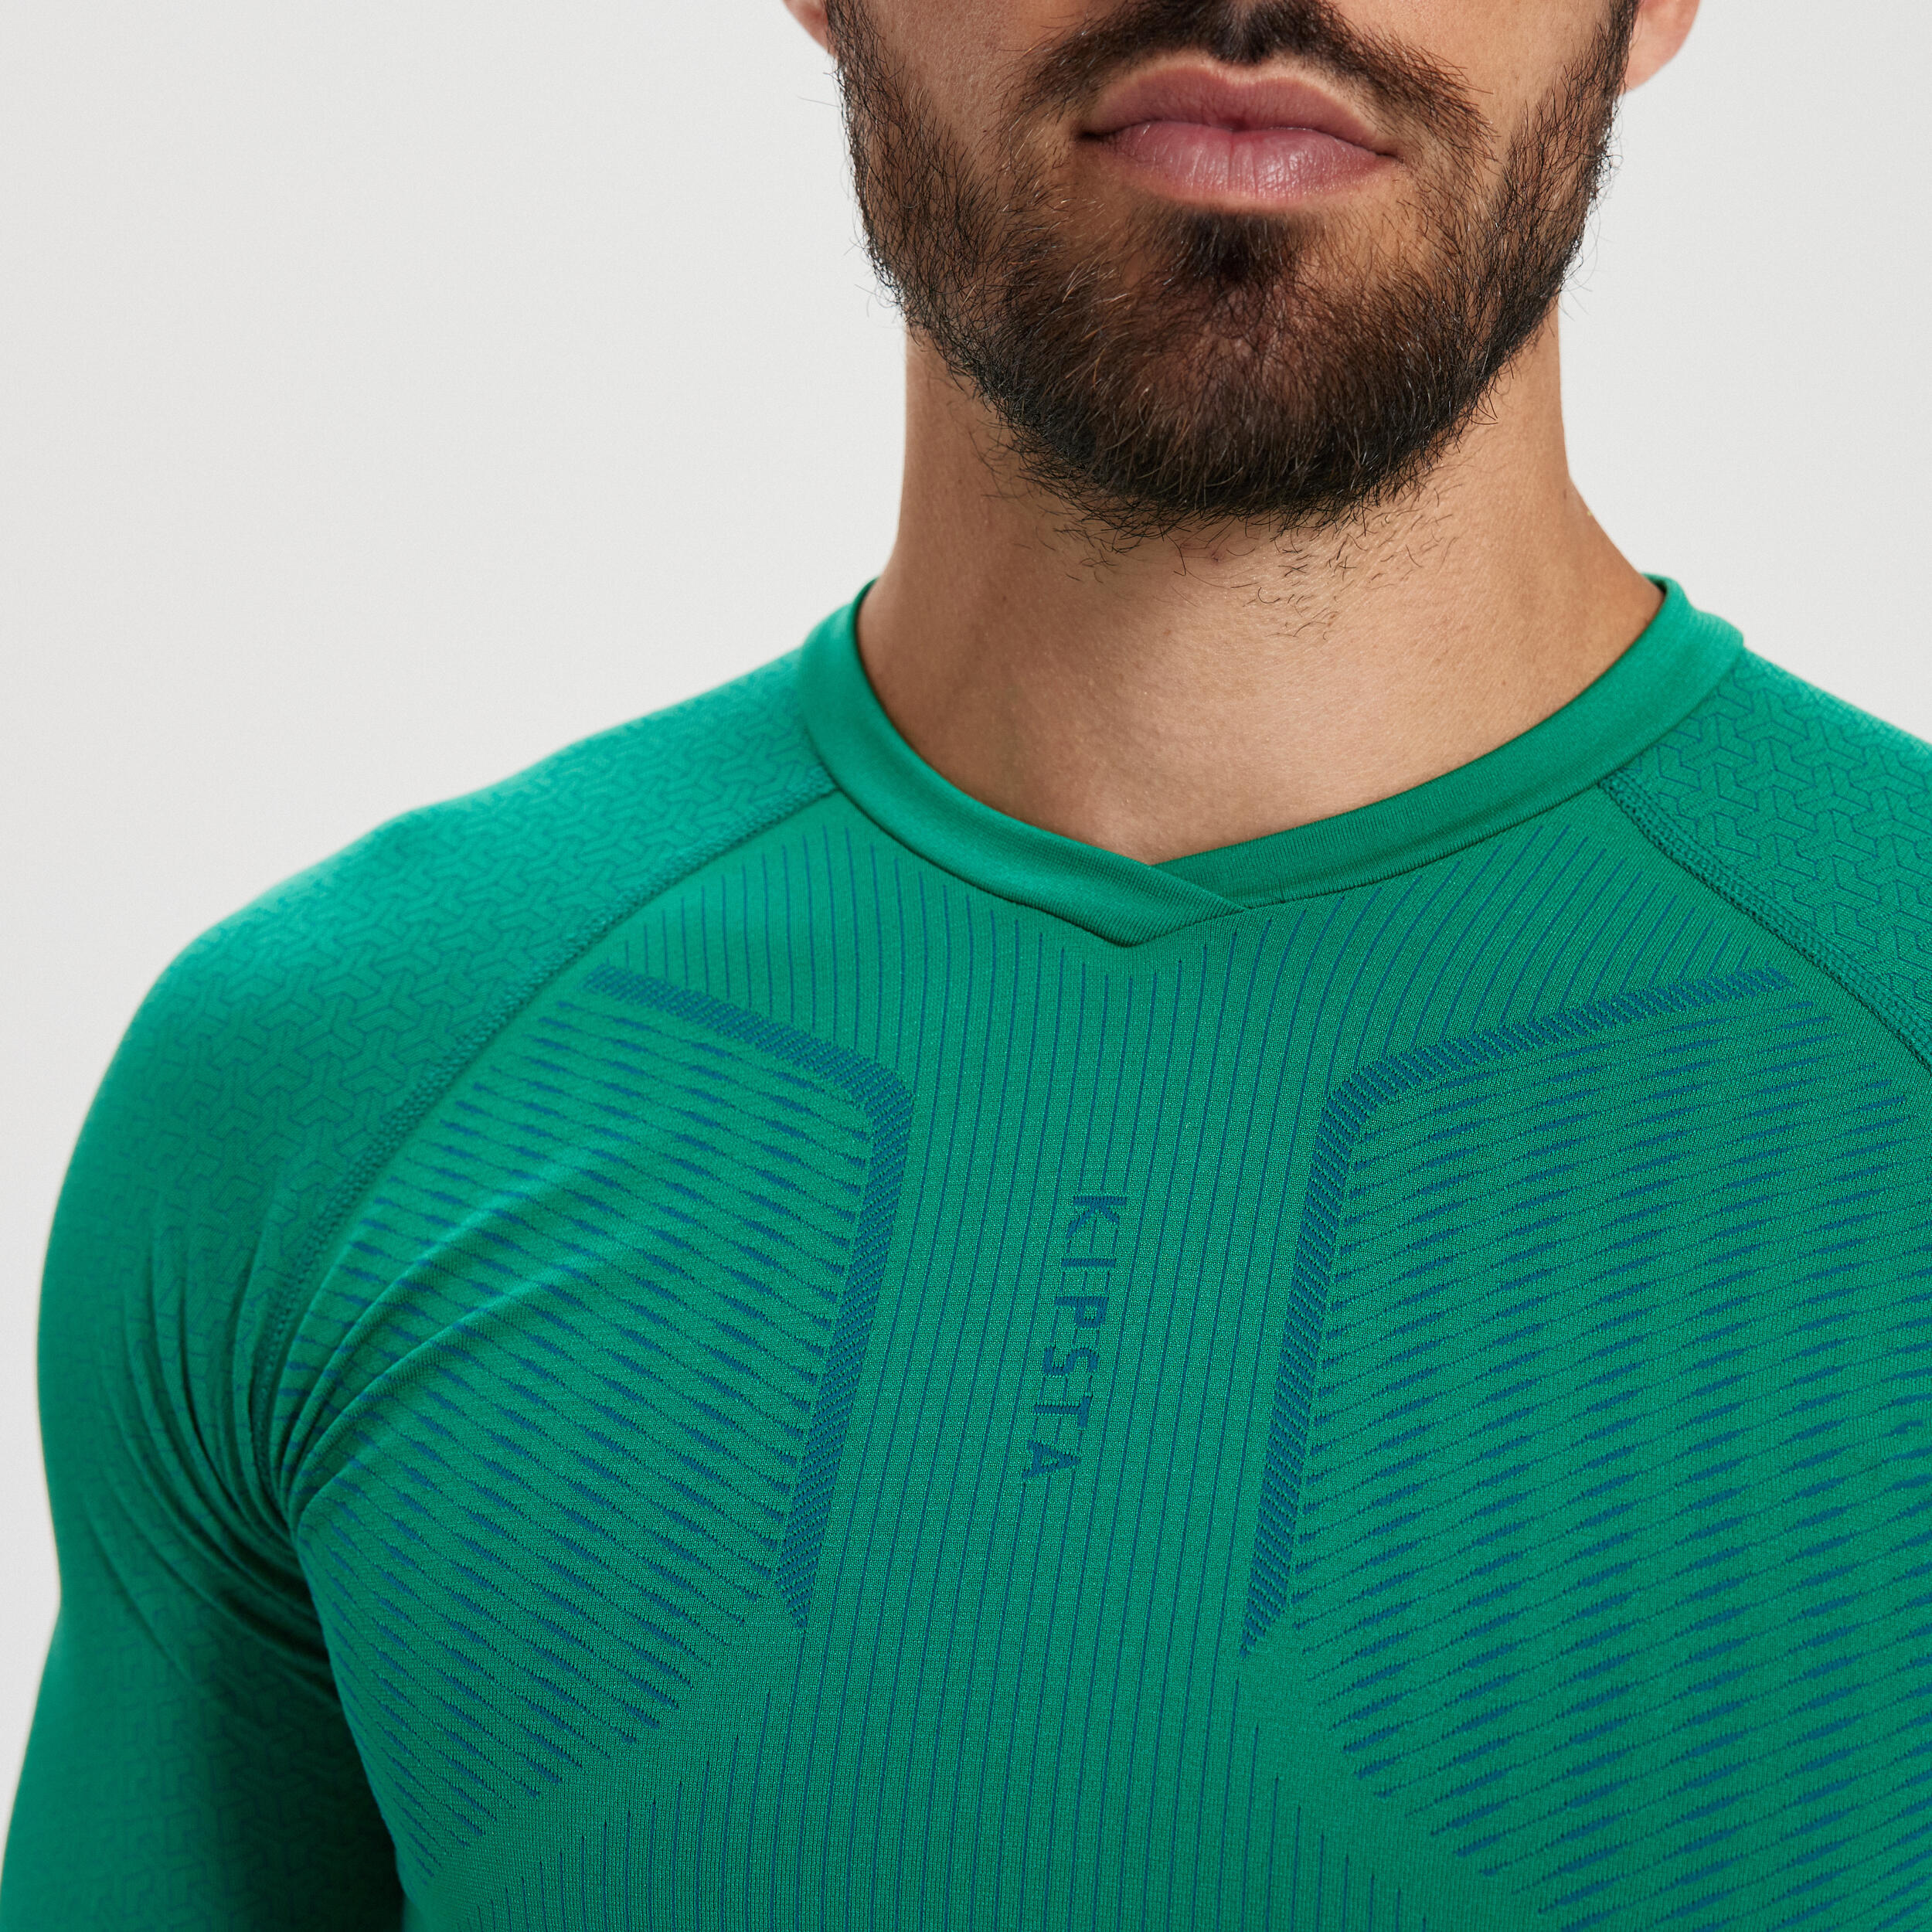 Adult Long-Sleeved Thermal Base Layer Top Keepdry 500 - Green 7/14